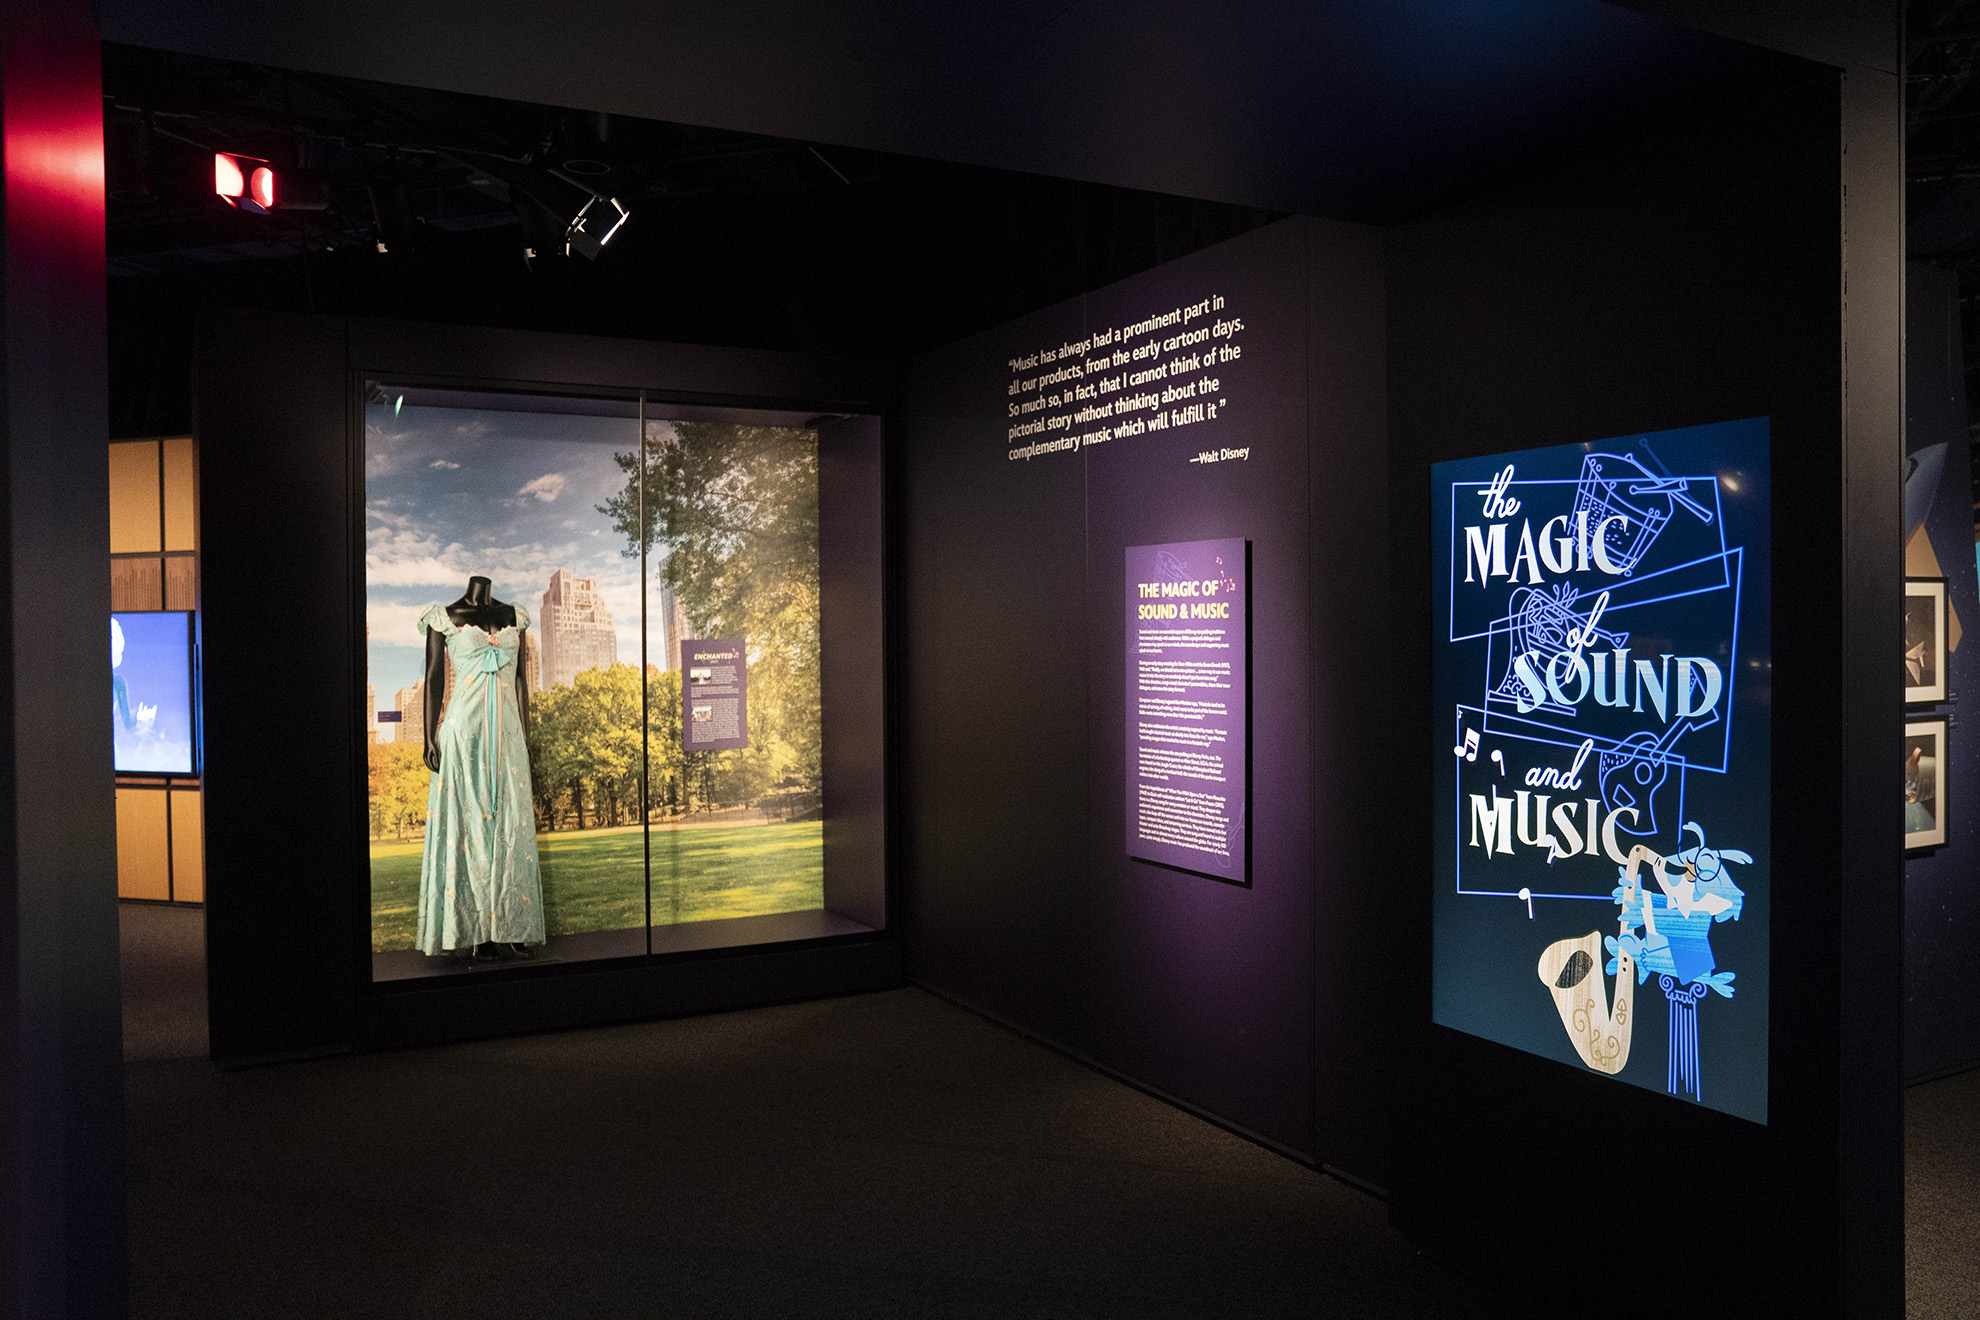 The Magic of Sound and Music gallery at Disney100: The Exhibition, now open at The Franklin Institute in Philadelphia. ©Disney